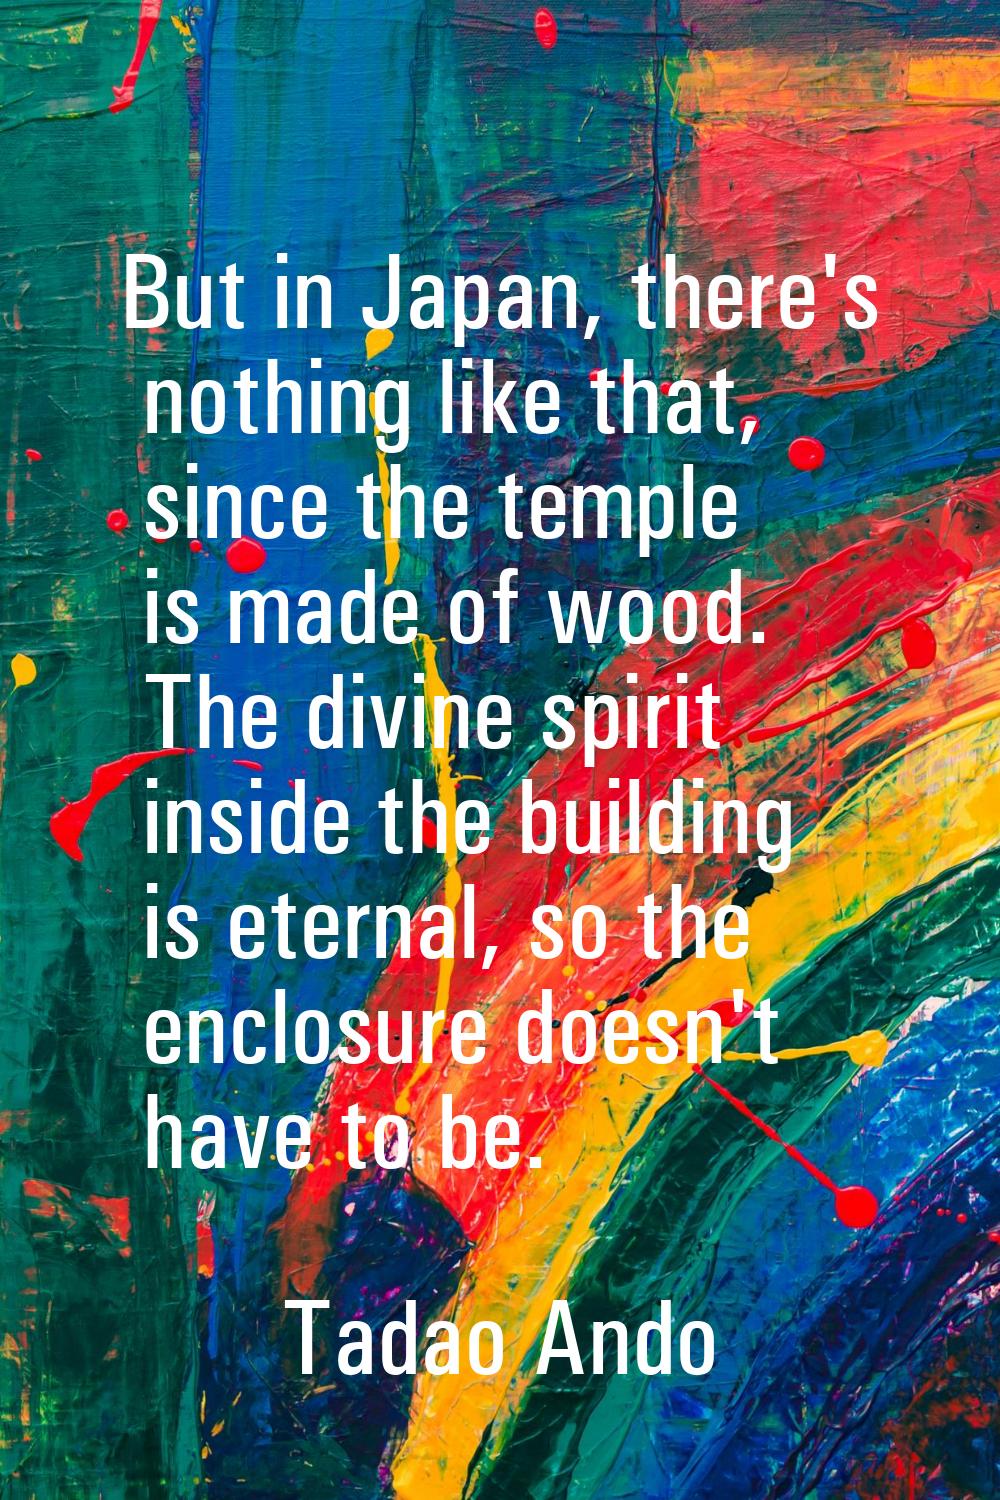 But in Japan, there's nothing like that, since the temple is made of wood. The divine spirit inside